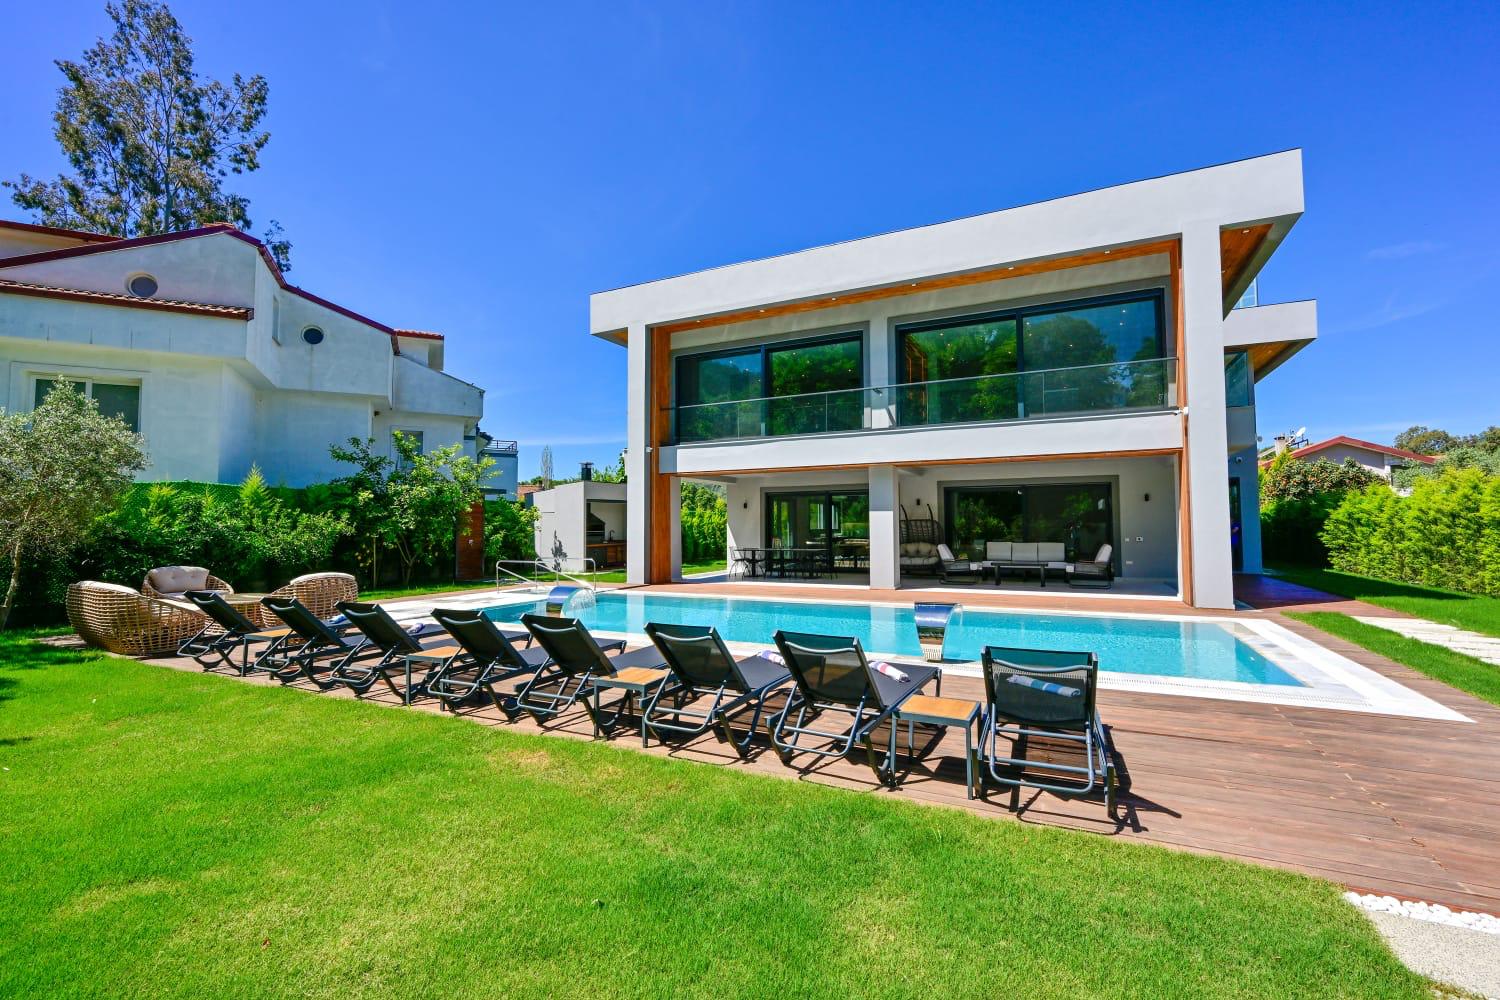 Villa for Rent in Inlice with Sauna and Jacuzzi, Close to the Sea